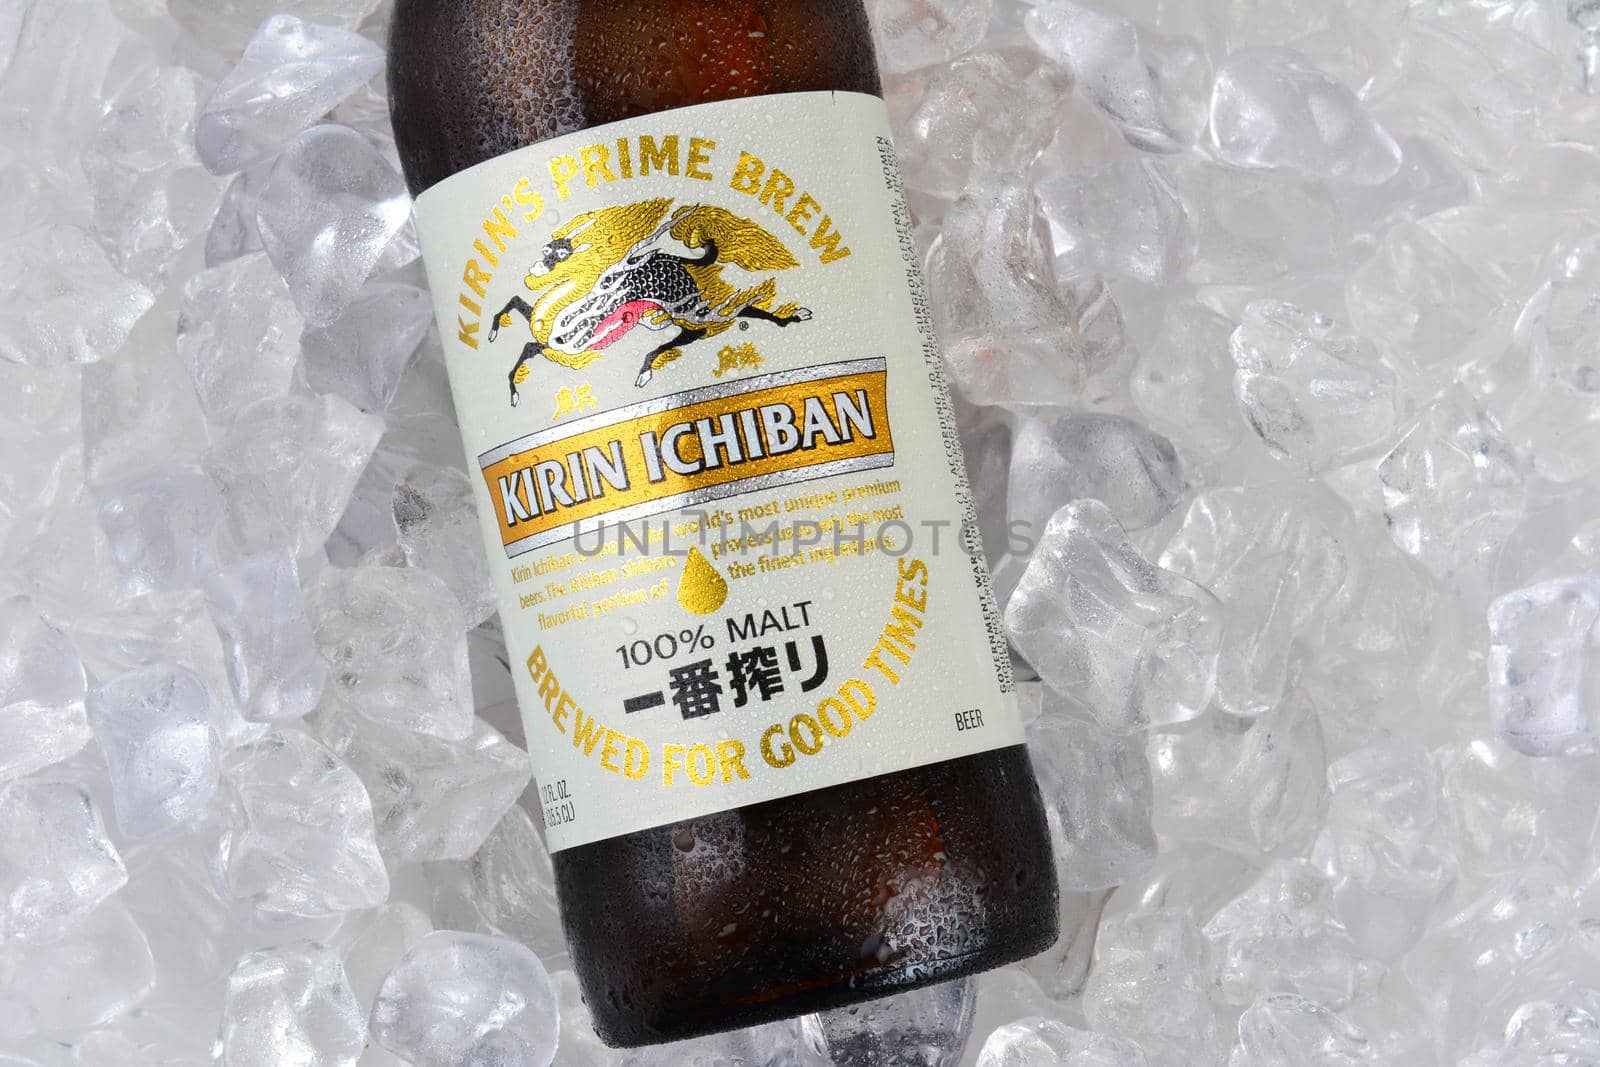 IRVINE, CA - JANUARY 11, 2015: A bottle of Kirin Ichiban closeup on a bed of ice. Kirin is a popular brand of Japanese beer imported into the United States.